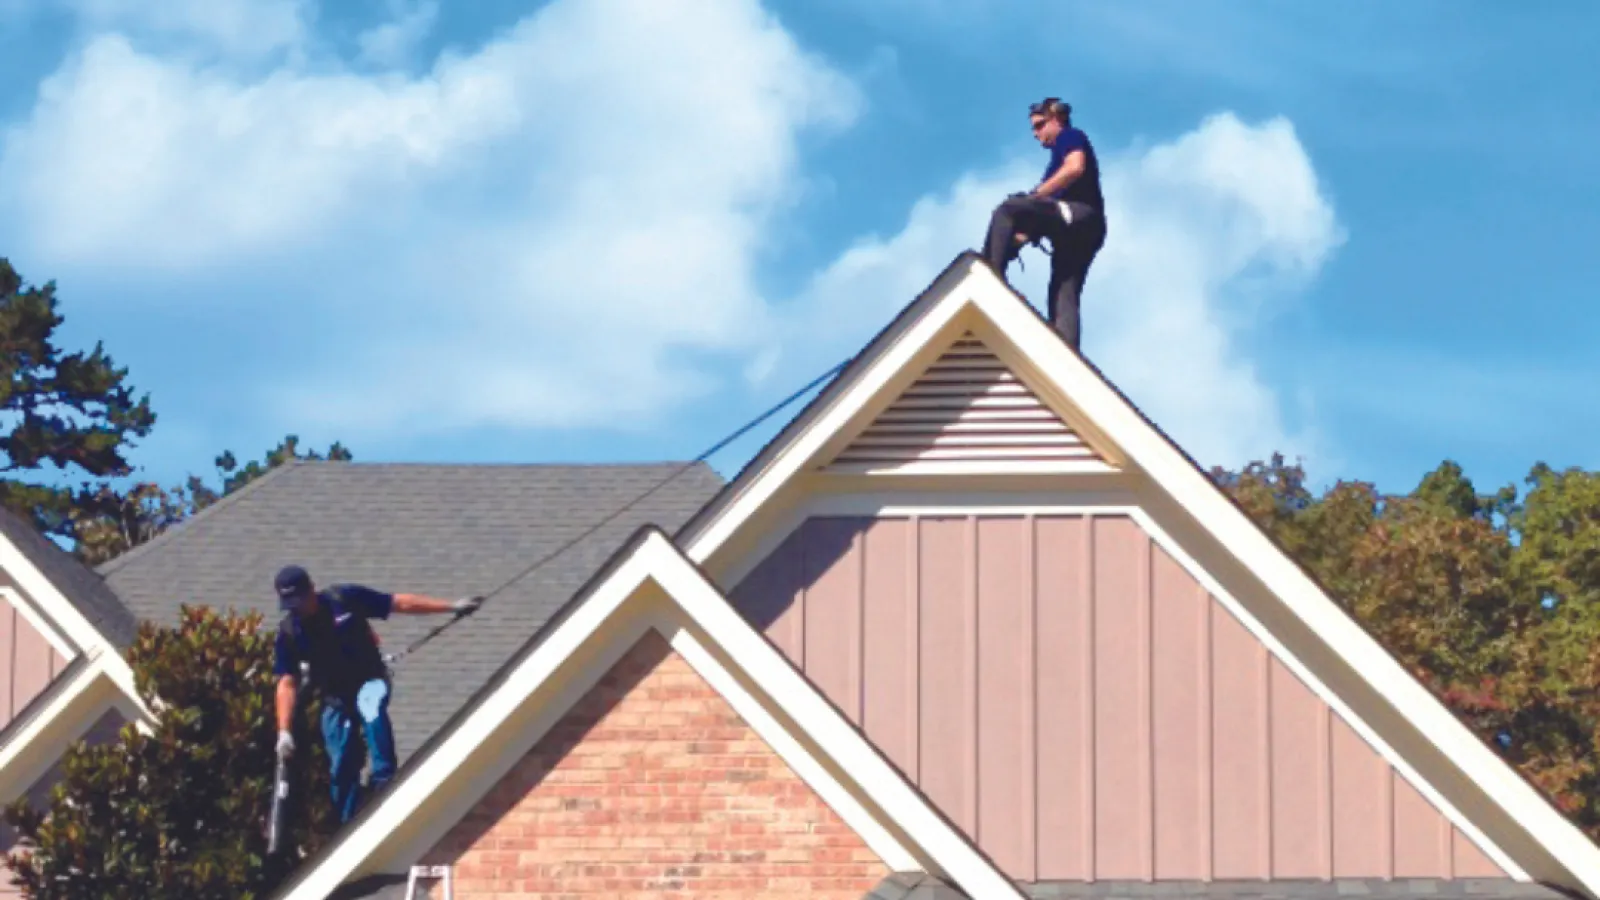 Two Team Advanced technicians on a roof cleaning gutters